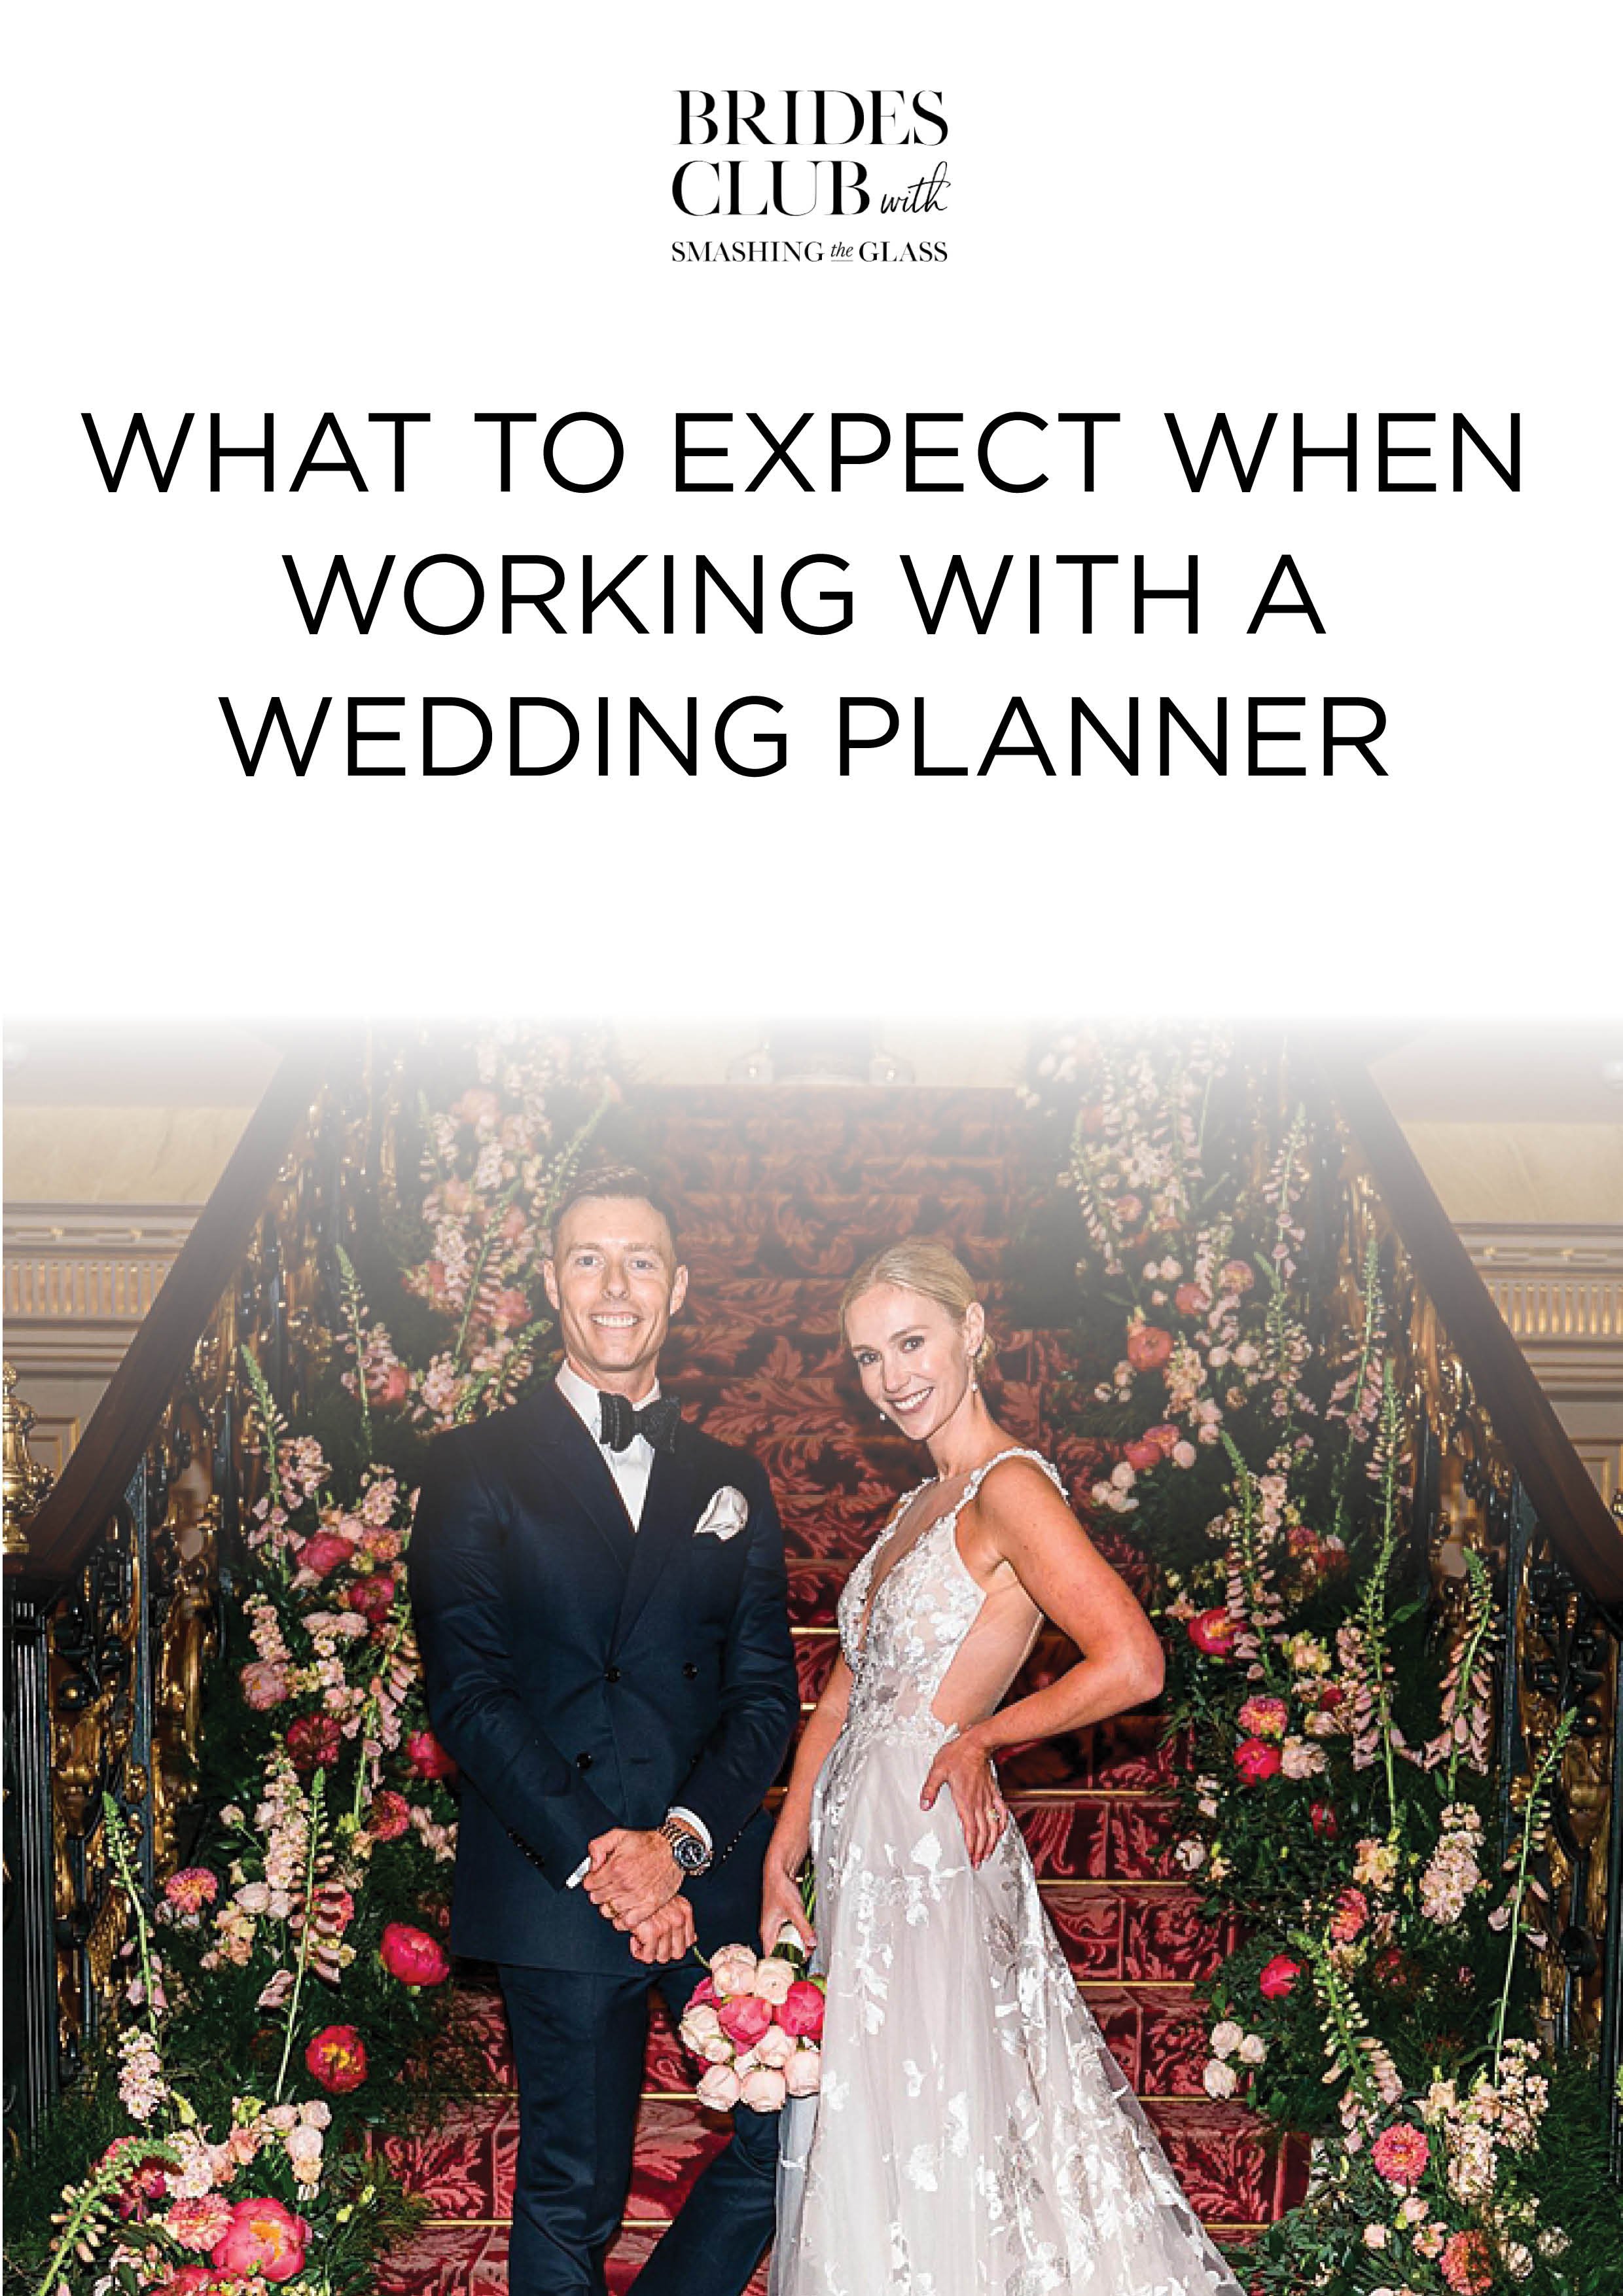 What to expect when working with a wedding planner